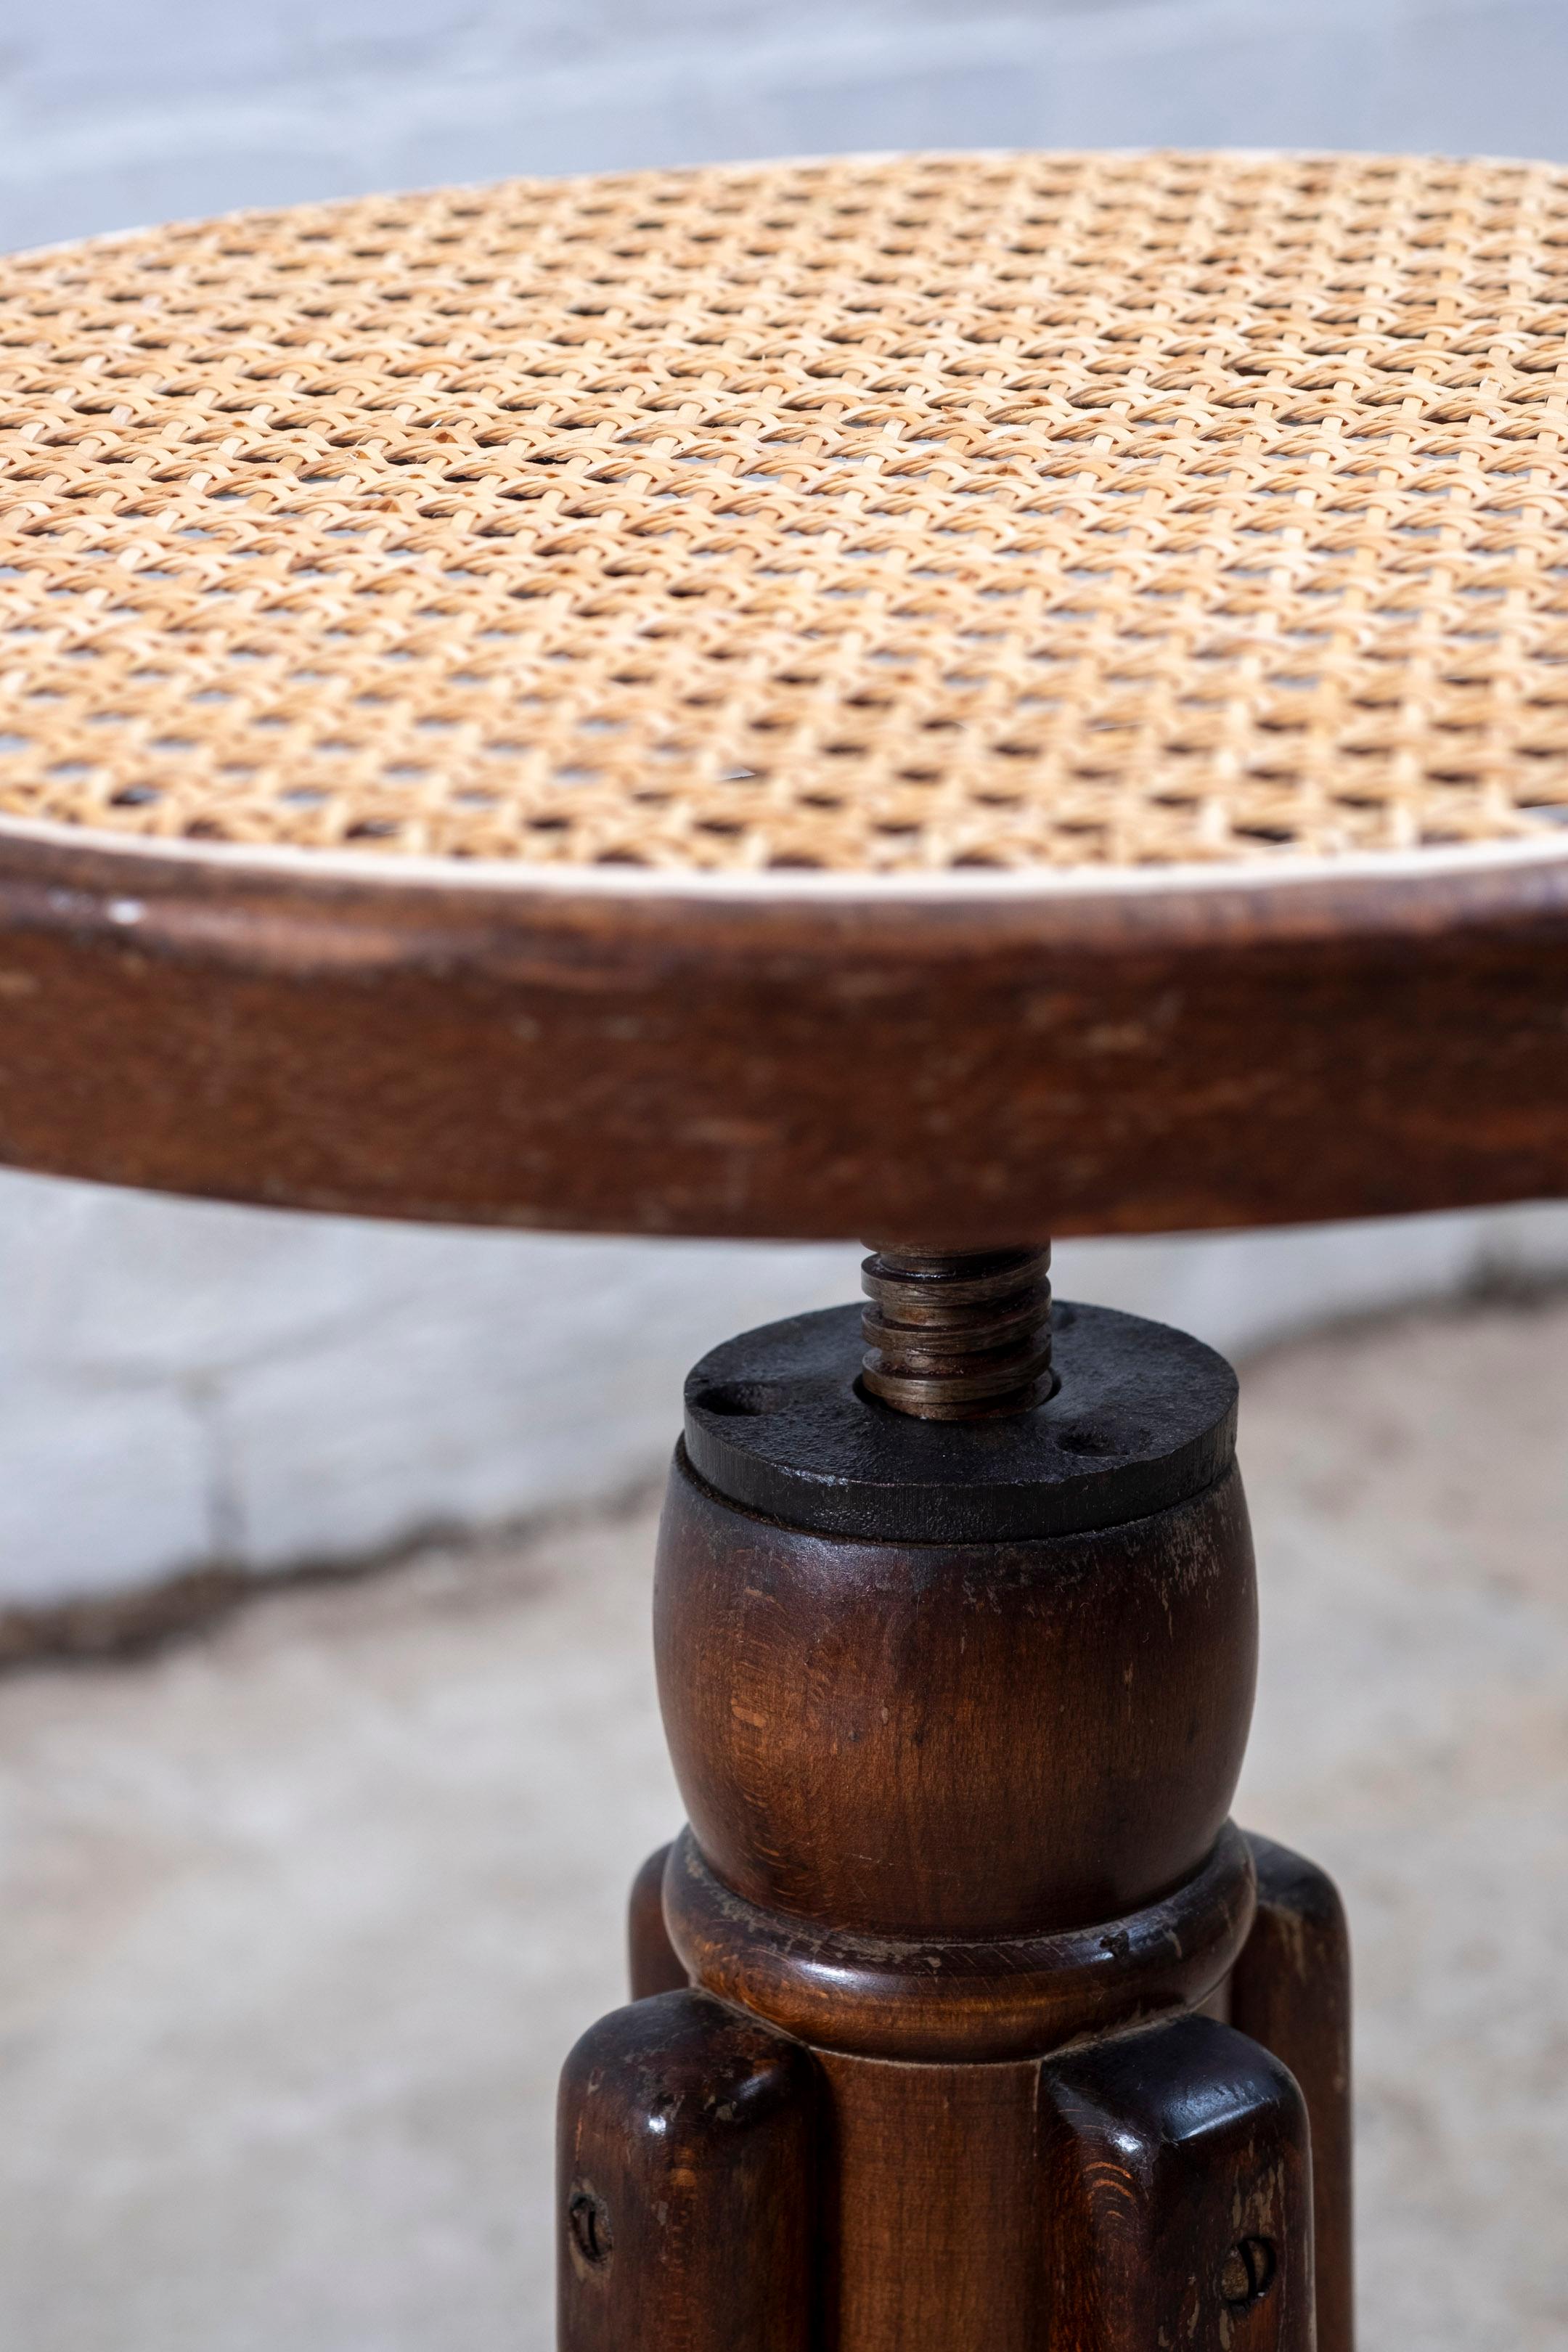 Wicker Adjustable Piano Stool in The Style of Thonet, 1940s For Sale